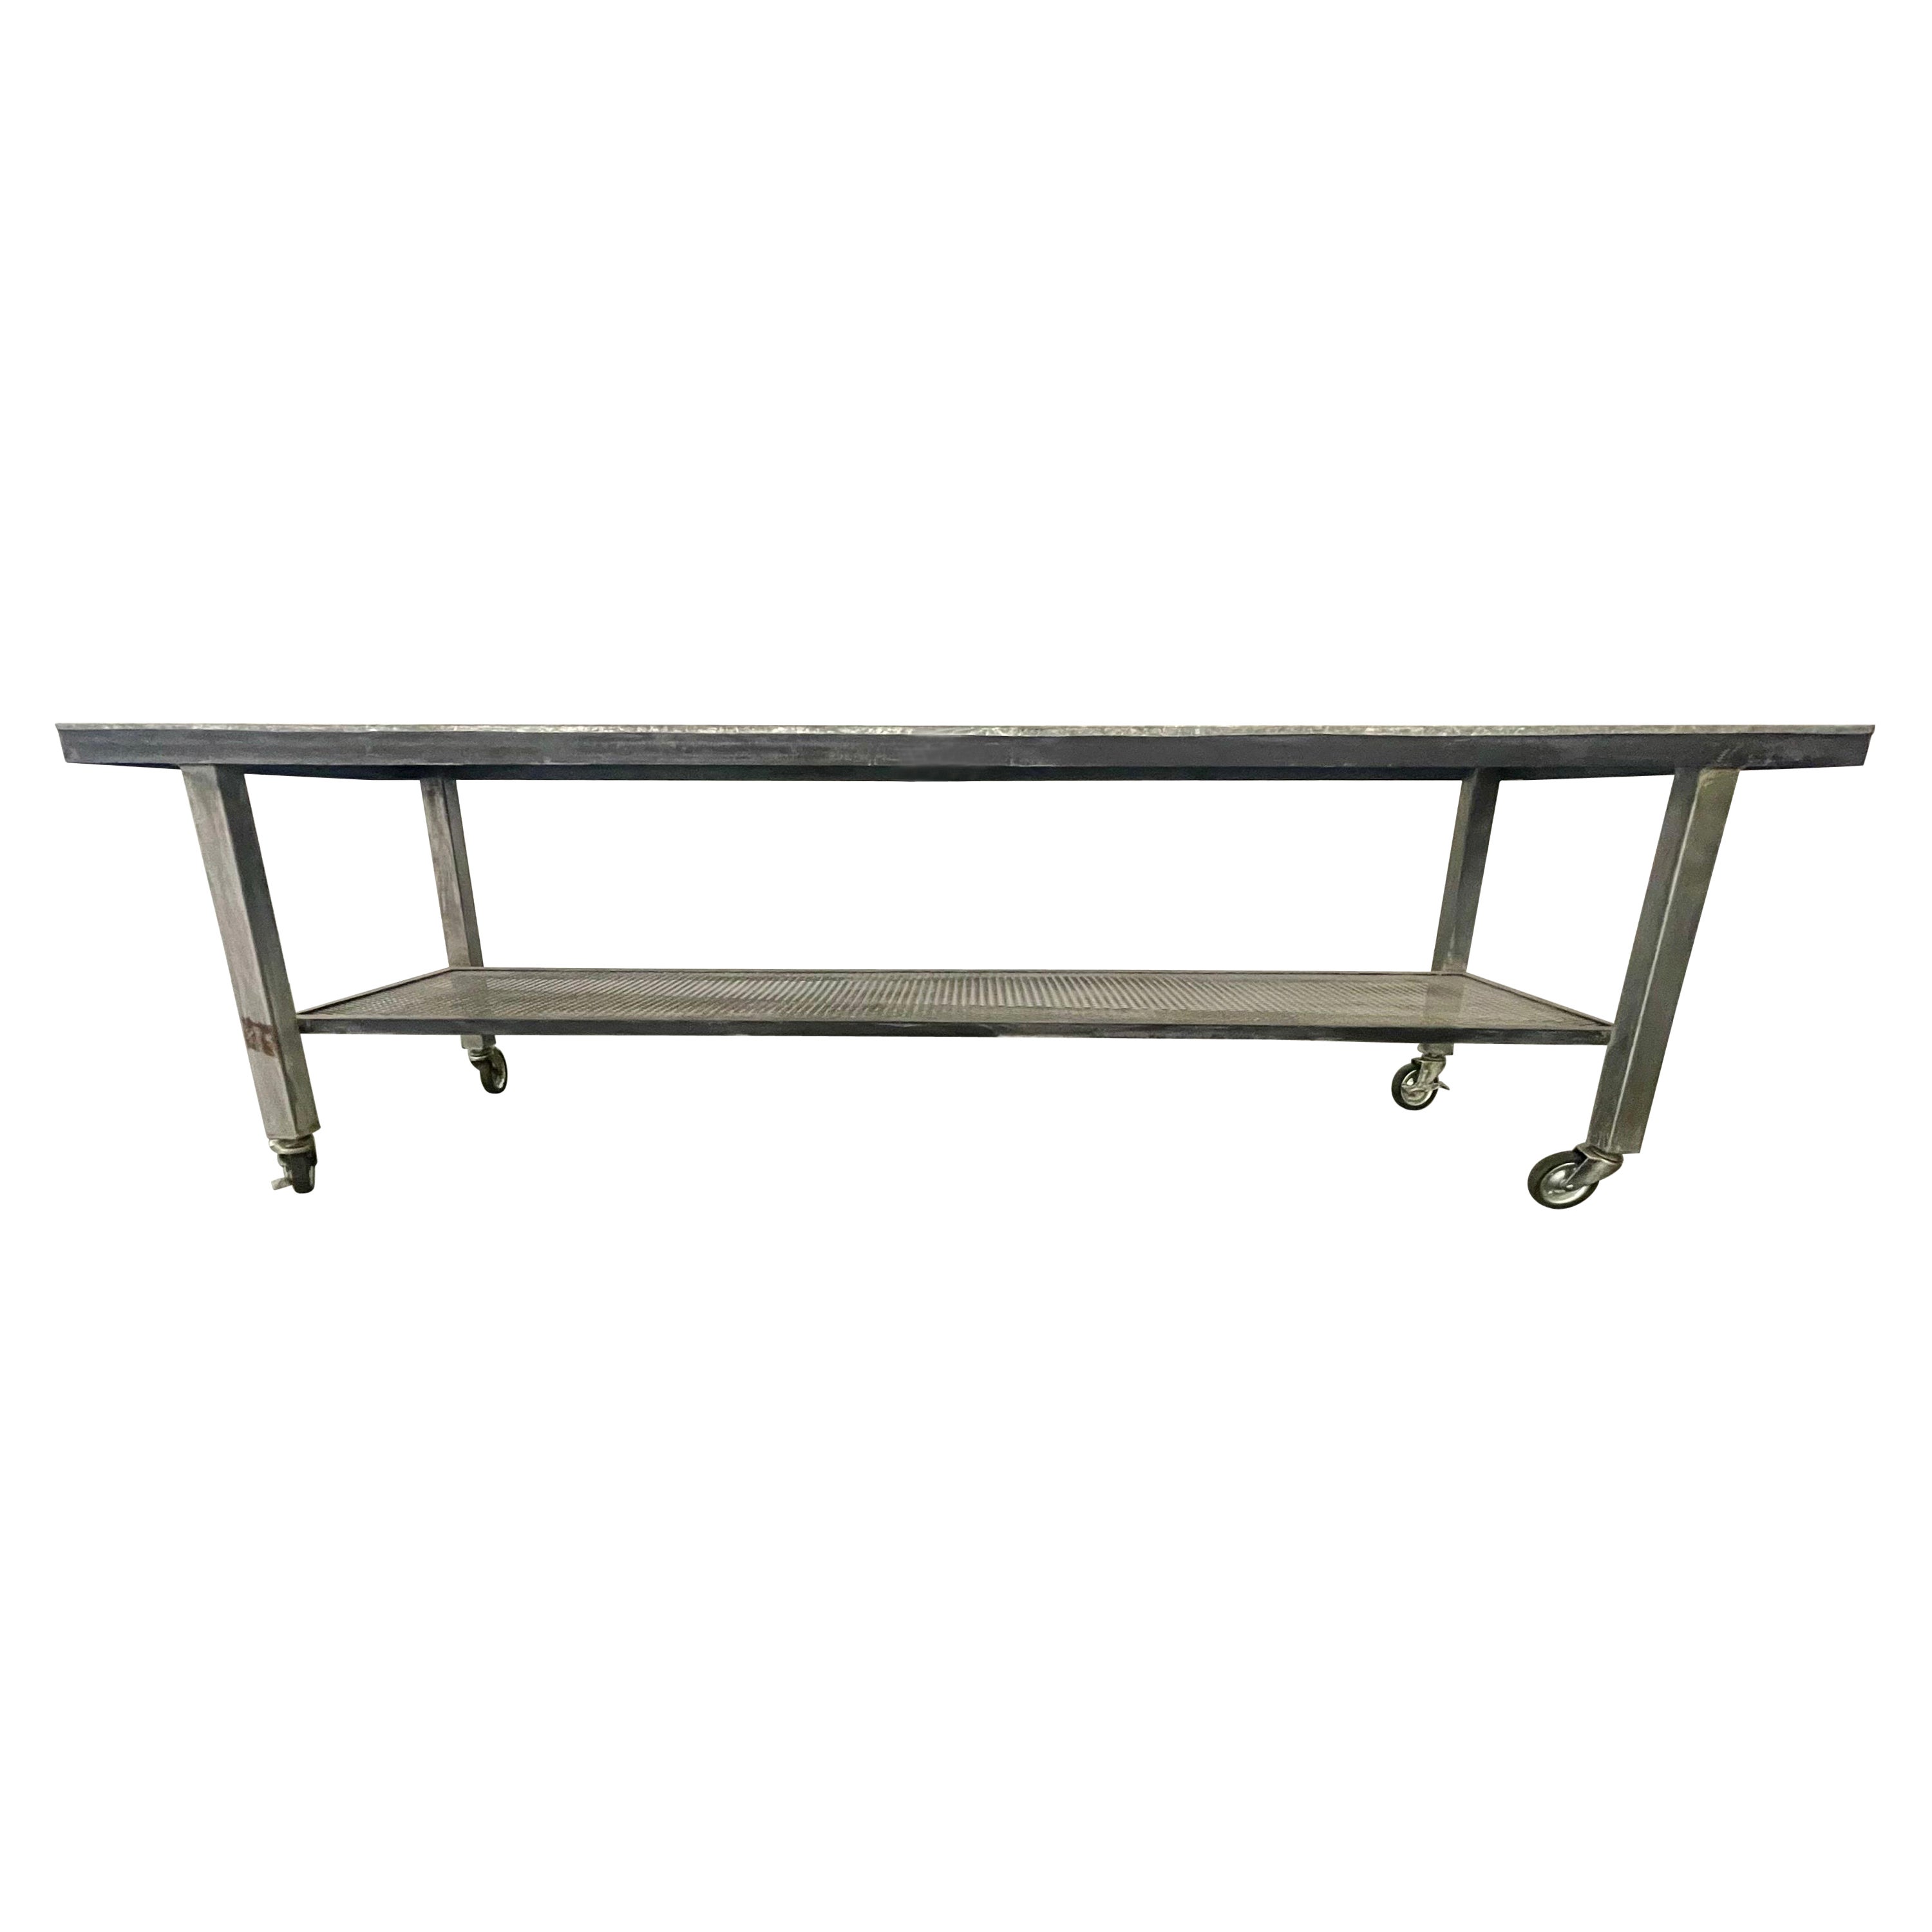 Vintage Style Metal Industrial Table on Wheels, circa 2000 For Sale